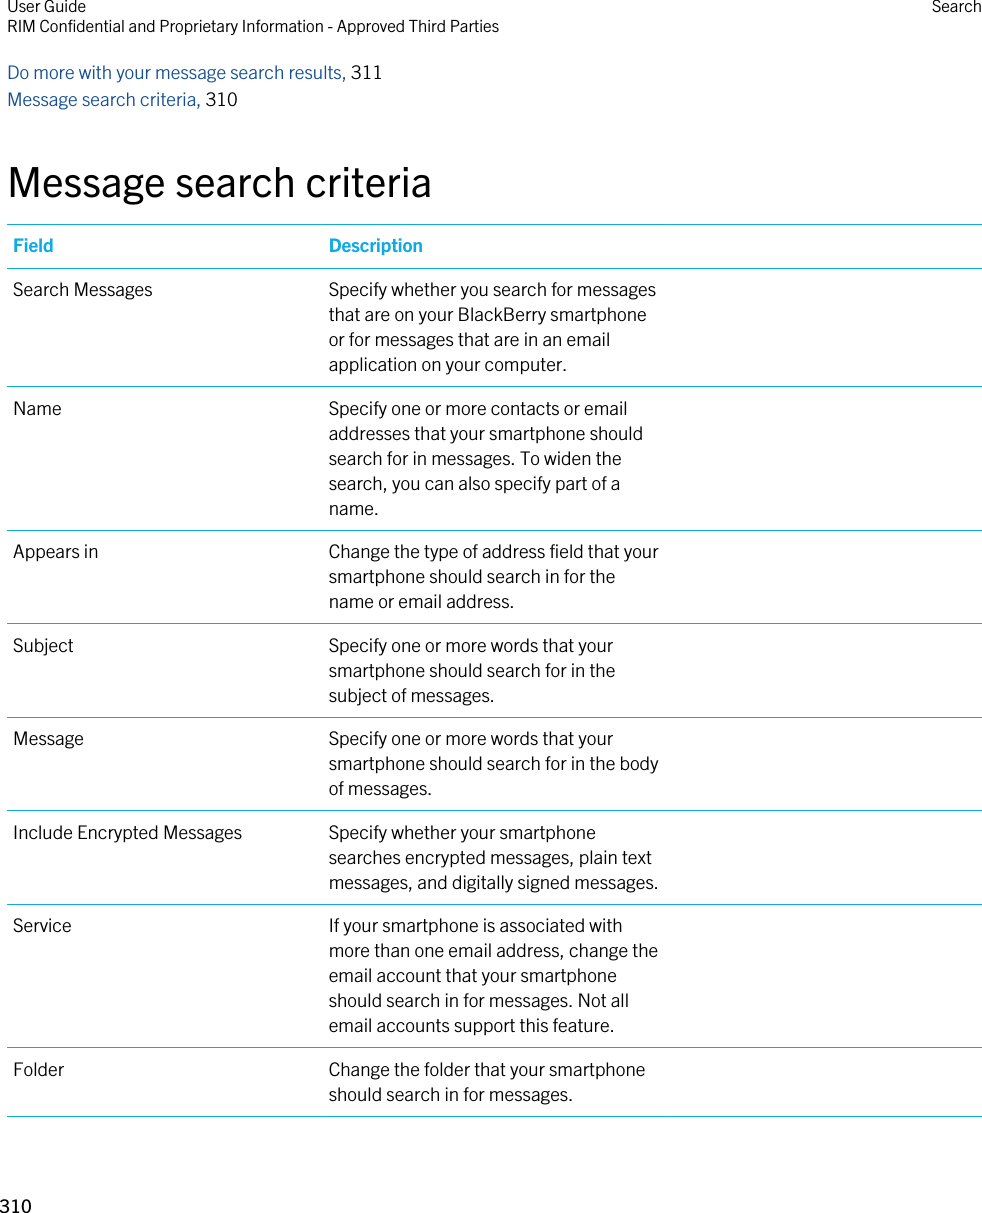 Do more with your message search results, 311Message search criteria, 310Message search criteriaField DescriptionSearch Messages Specify whether you search for messages that are on your BlackBerry smartphone or for messages that are in an email application on your computer.Name Specify one or more contacts or email addresses that your smartphone should search for in messages. To widen the search, you can also specify part of a name.Appears in Change the type of address field that your smartphone should search in for the name or email address.Subject Specify one or more words that your smartphone should search for in the subject of messages.Message Specify one or more words that your smartphone should search for in the body of messages.Include Encrypted Messages Specify whether your smartphone searches encrypted messages, plain text messages, and digitally signed messages.Service If your smartphone is associated with more than one email address, change the email account that your smartphone should search in for messages. Not all email accounts support this feature.Folder Change the folder that your smartphone should search in for messages.User GuideRIM Confidential and Proprietary Information - Approved Third Parties Search310 